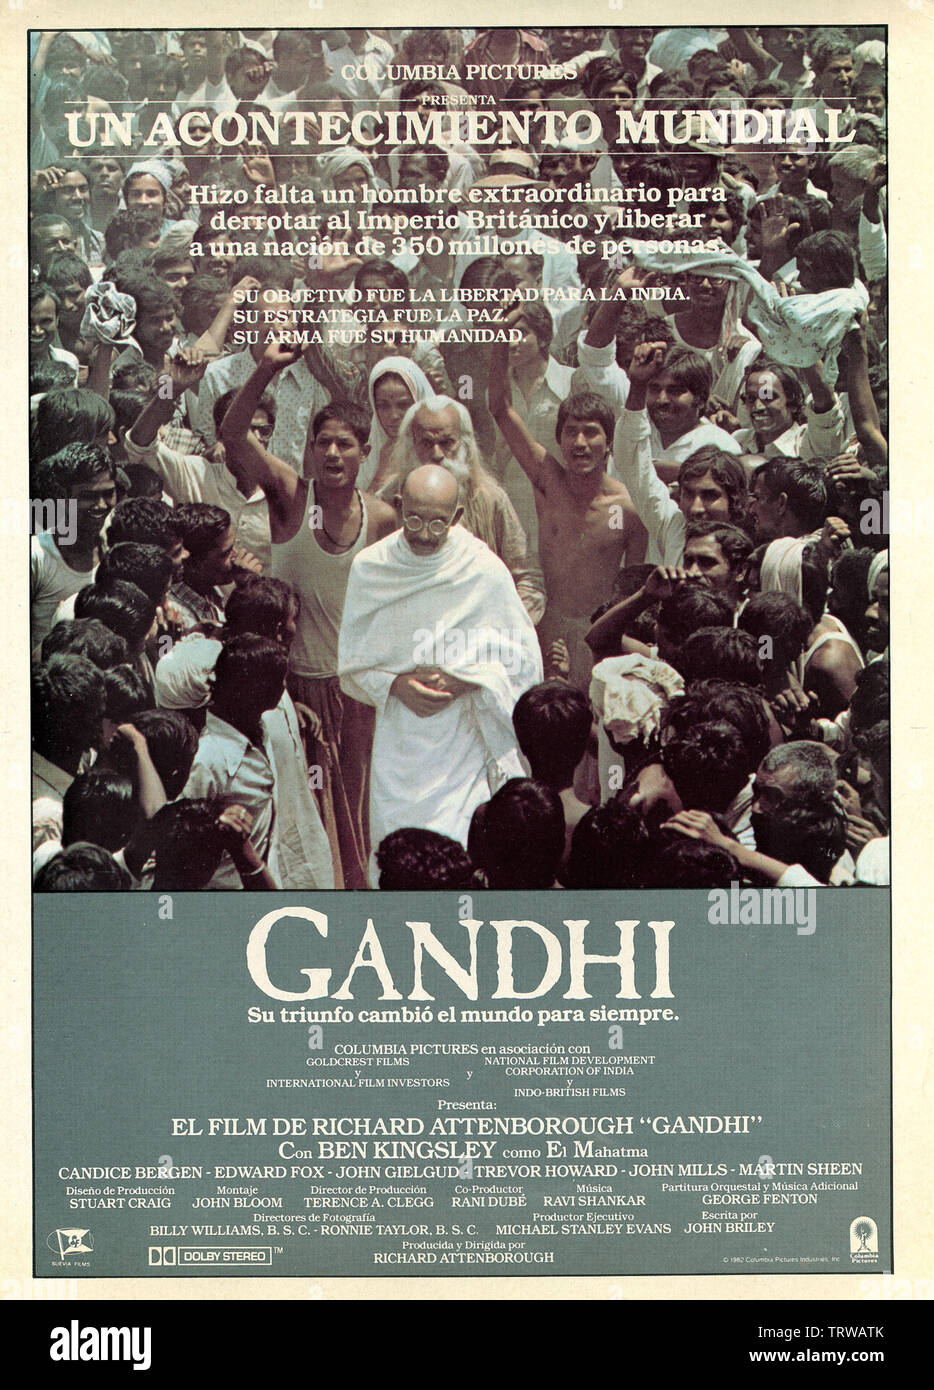 GANDHI and KINGSLEY BEN 1943-BEN KINGSLEY in GANDHI (1982). Copyright: Editorial use only. No merchandising or book covers. This is a publicly distributed handout. Access rights only, no license of copyright provided. Only to be reproduced in conjunction with promotion of this film. Credit: COLUMBIA PICTURES / Album Stock Photo